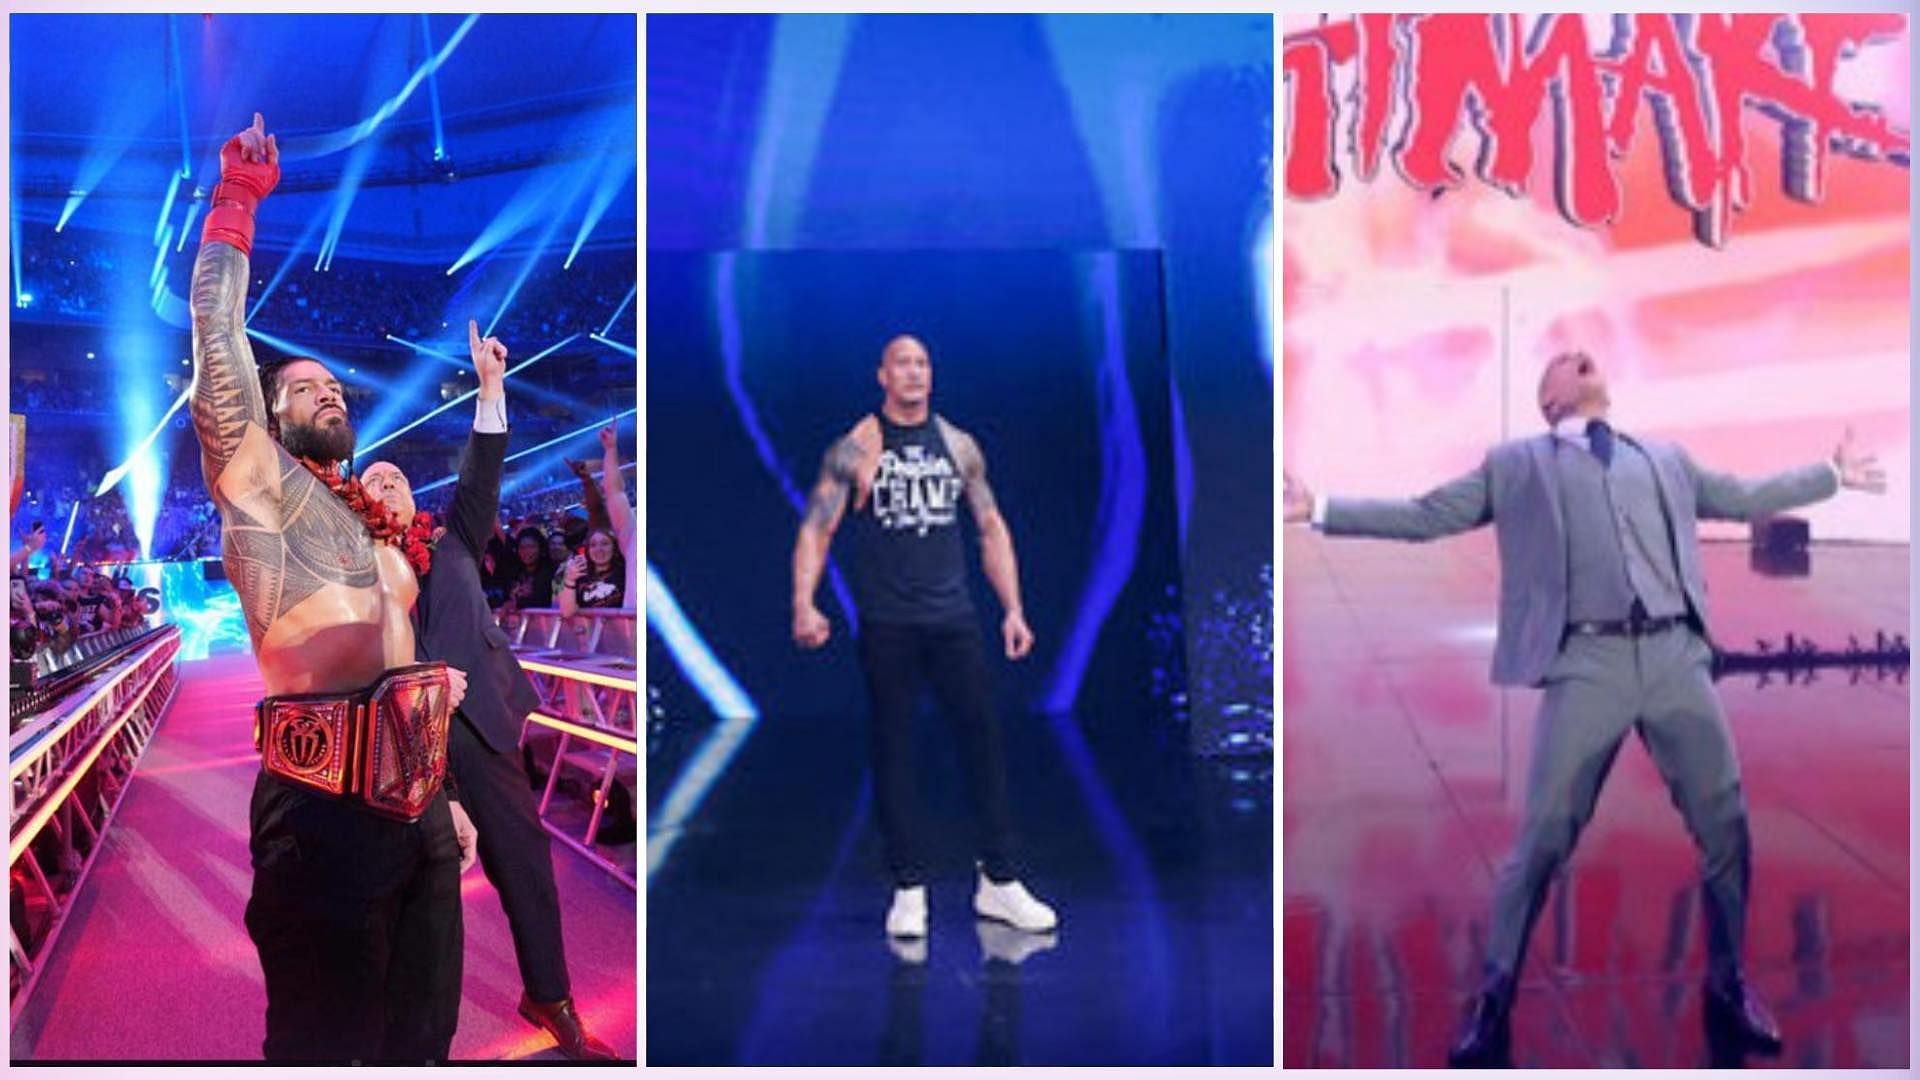 Roman Reigns, The Rock, and Cody Rhodes crossed paths at the WrestleMania XL Kickoff press event.